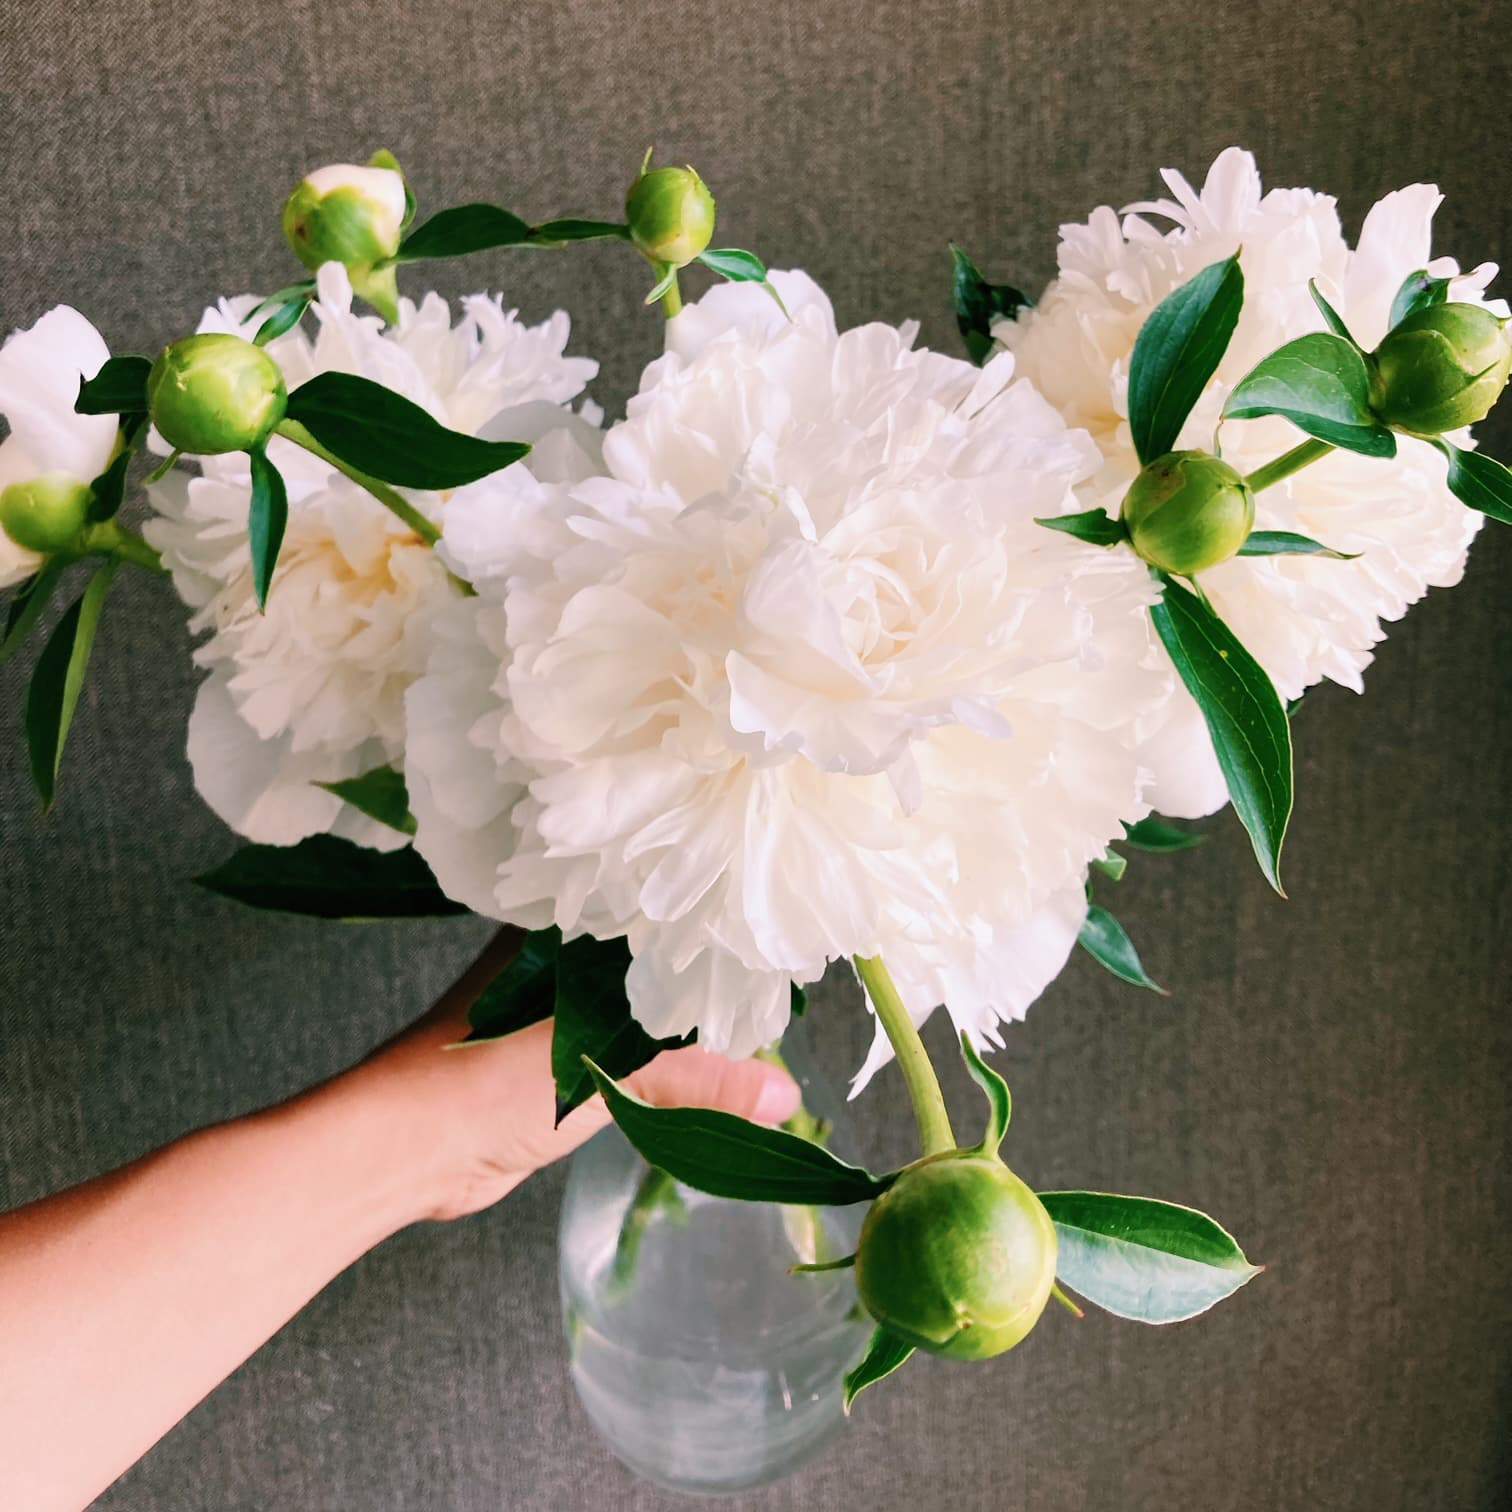 Peonies - small bunch